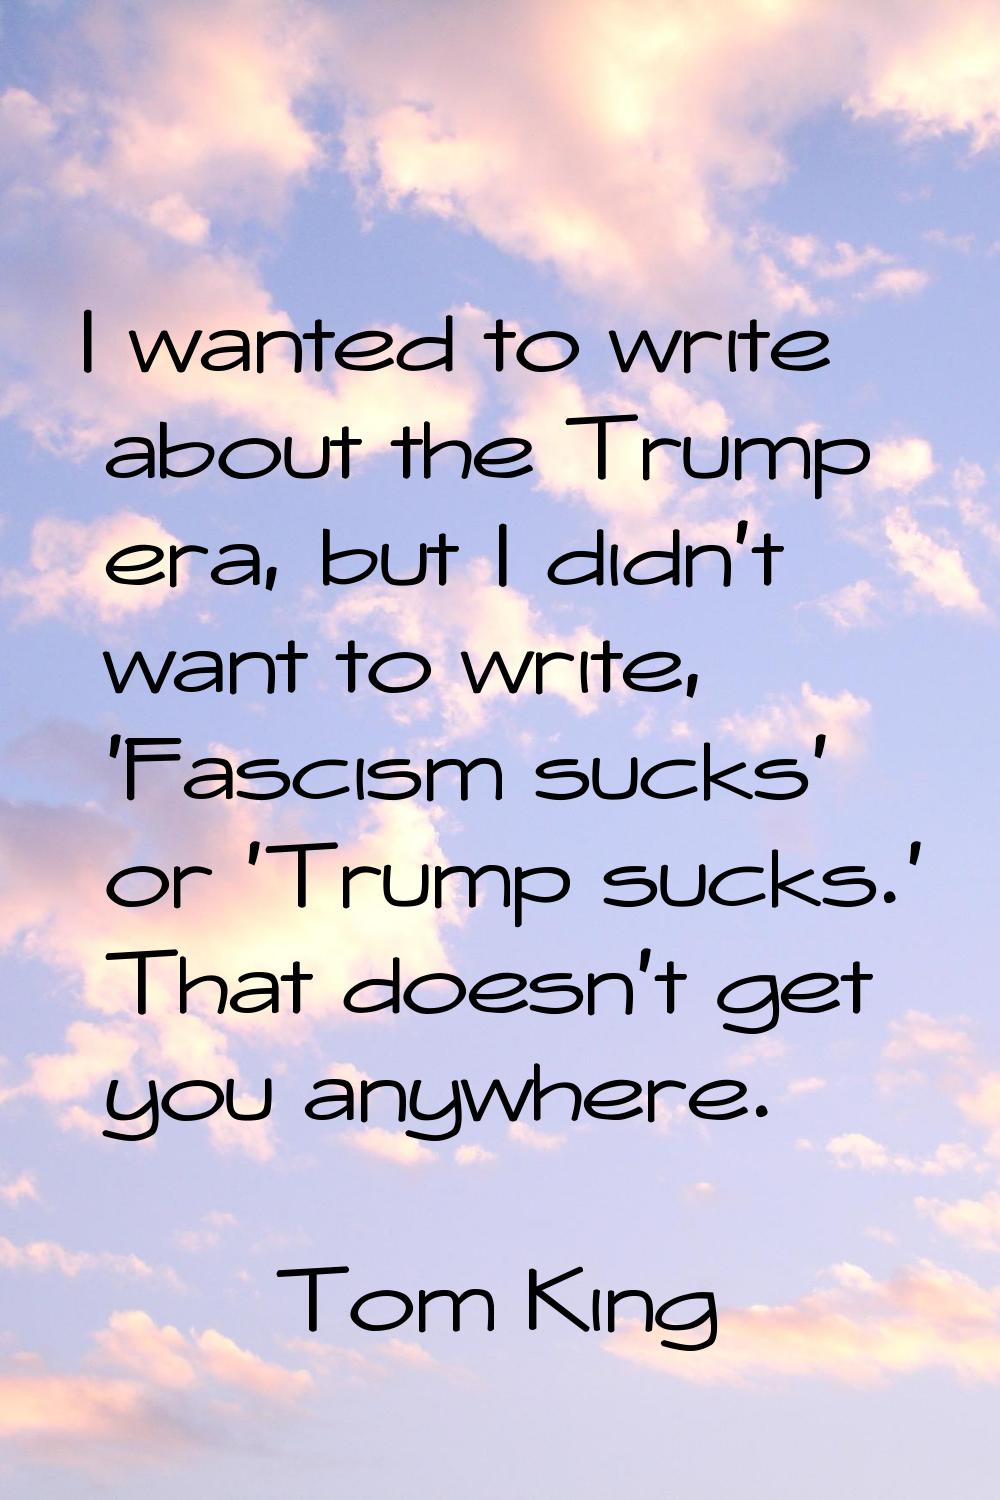 I wanted to write about the Trump era, but I didn't want to write, 'Fascism sucks' or 'Trump sucks.